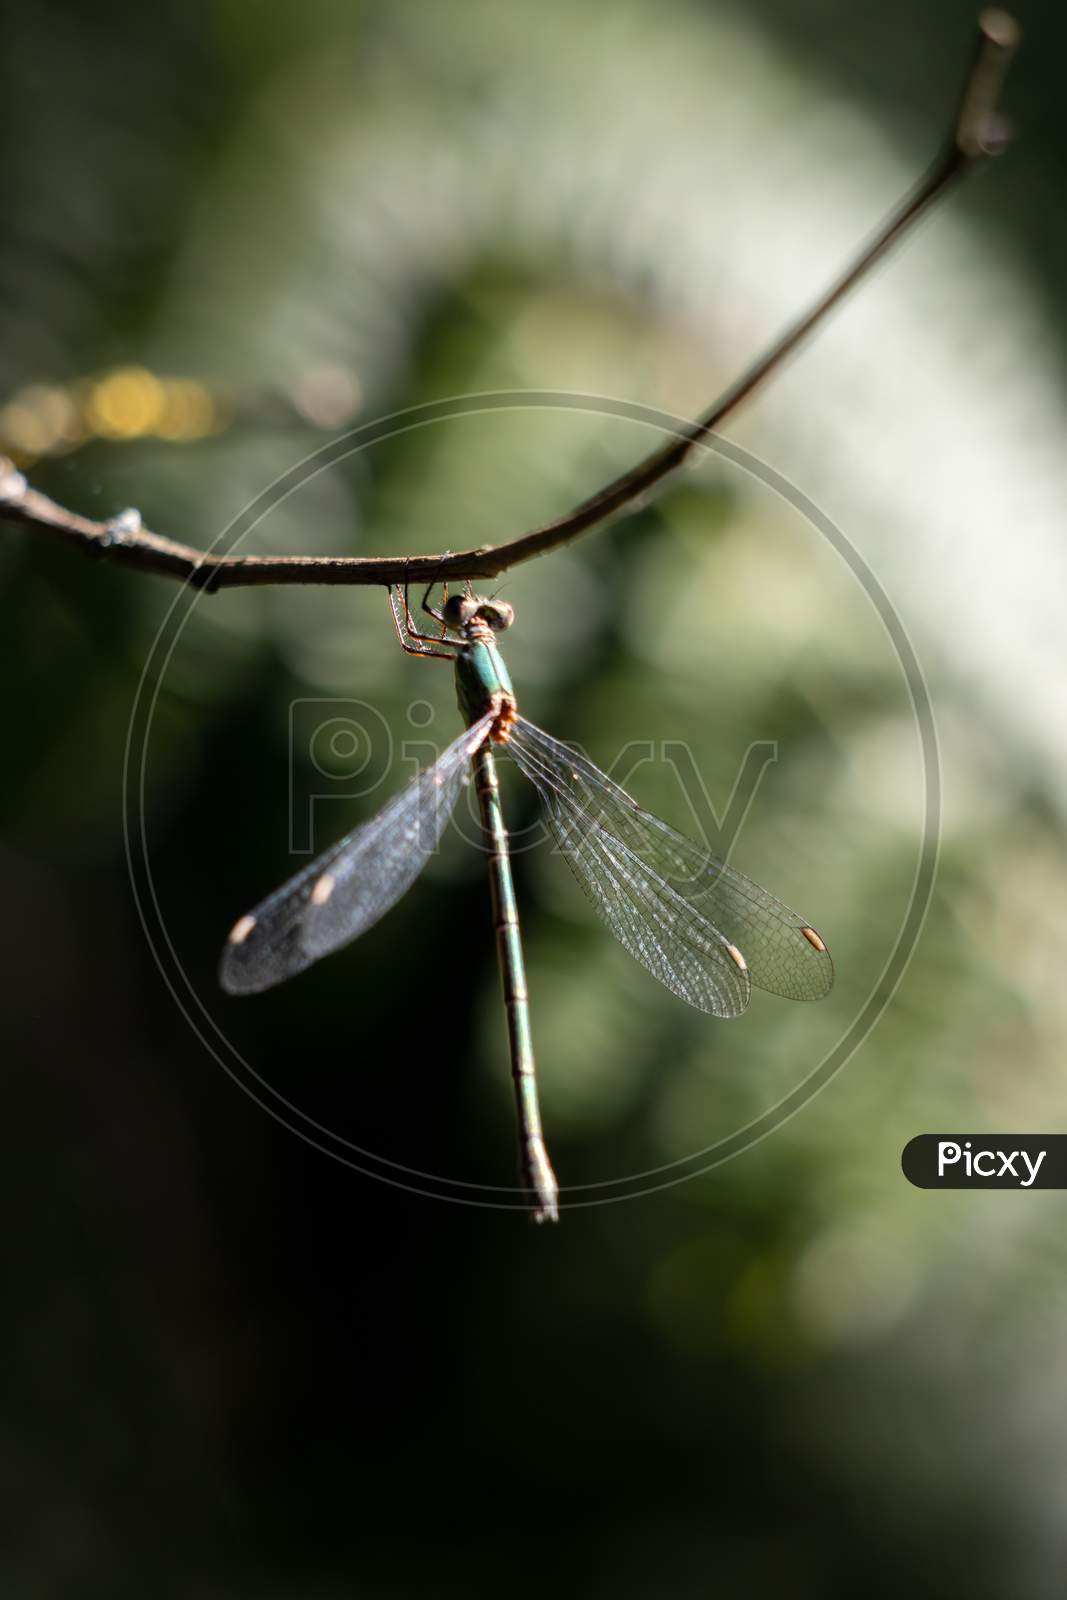 Willow Emerald Damselfly (Chalcolestes Viridis) Hanging From A Branch